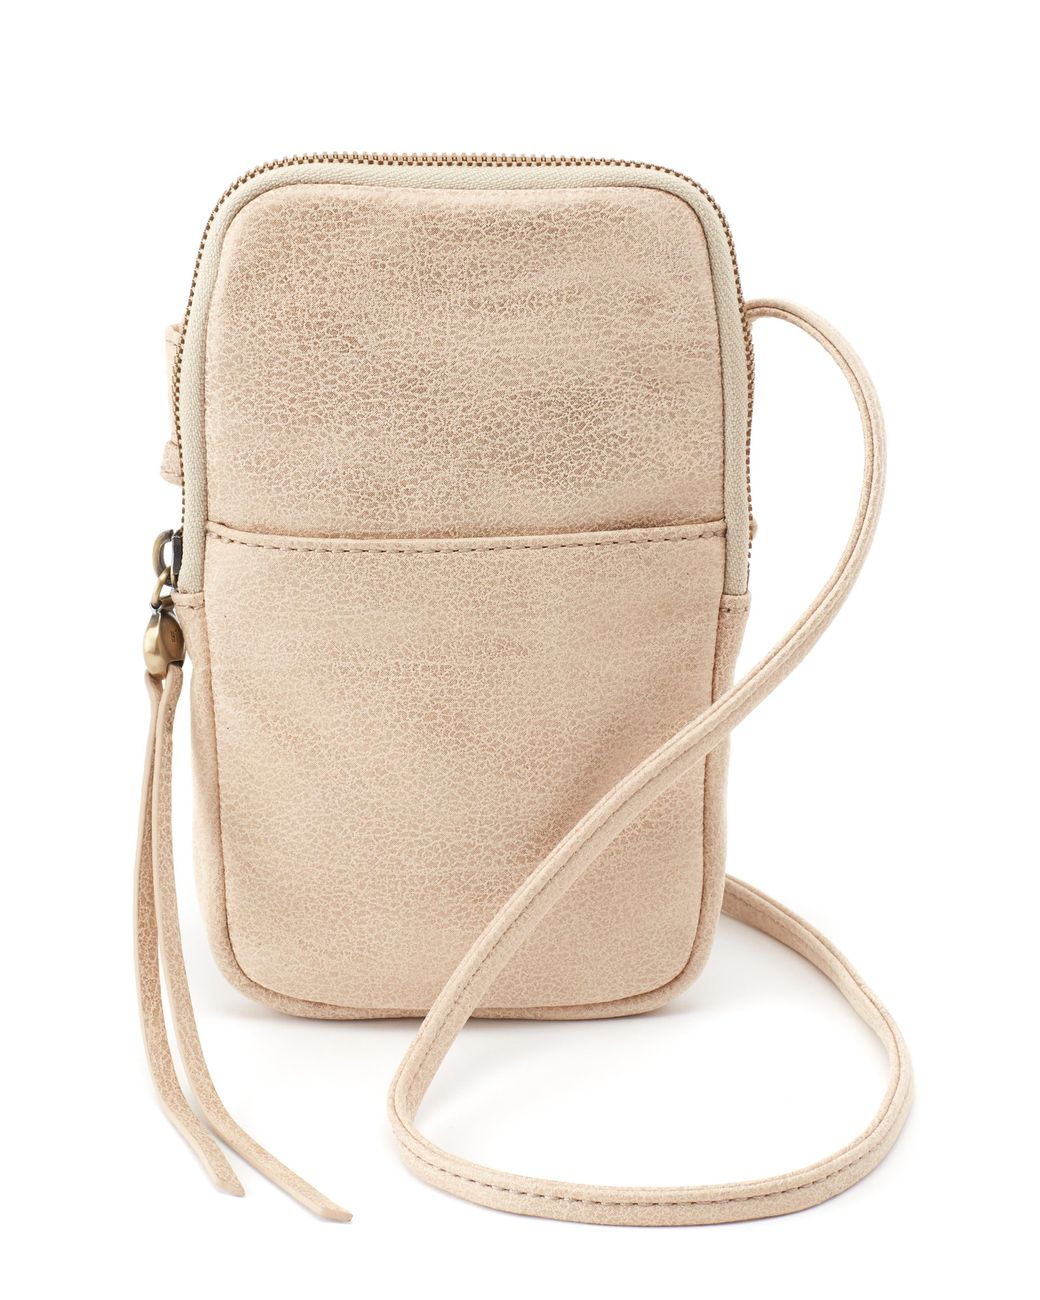 Hobo International Fate Leather Crossbody Bag In Buffed Gold At ...